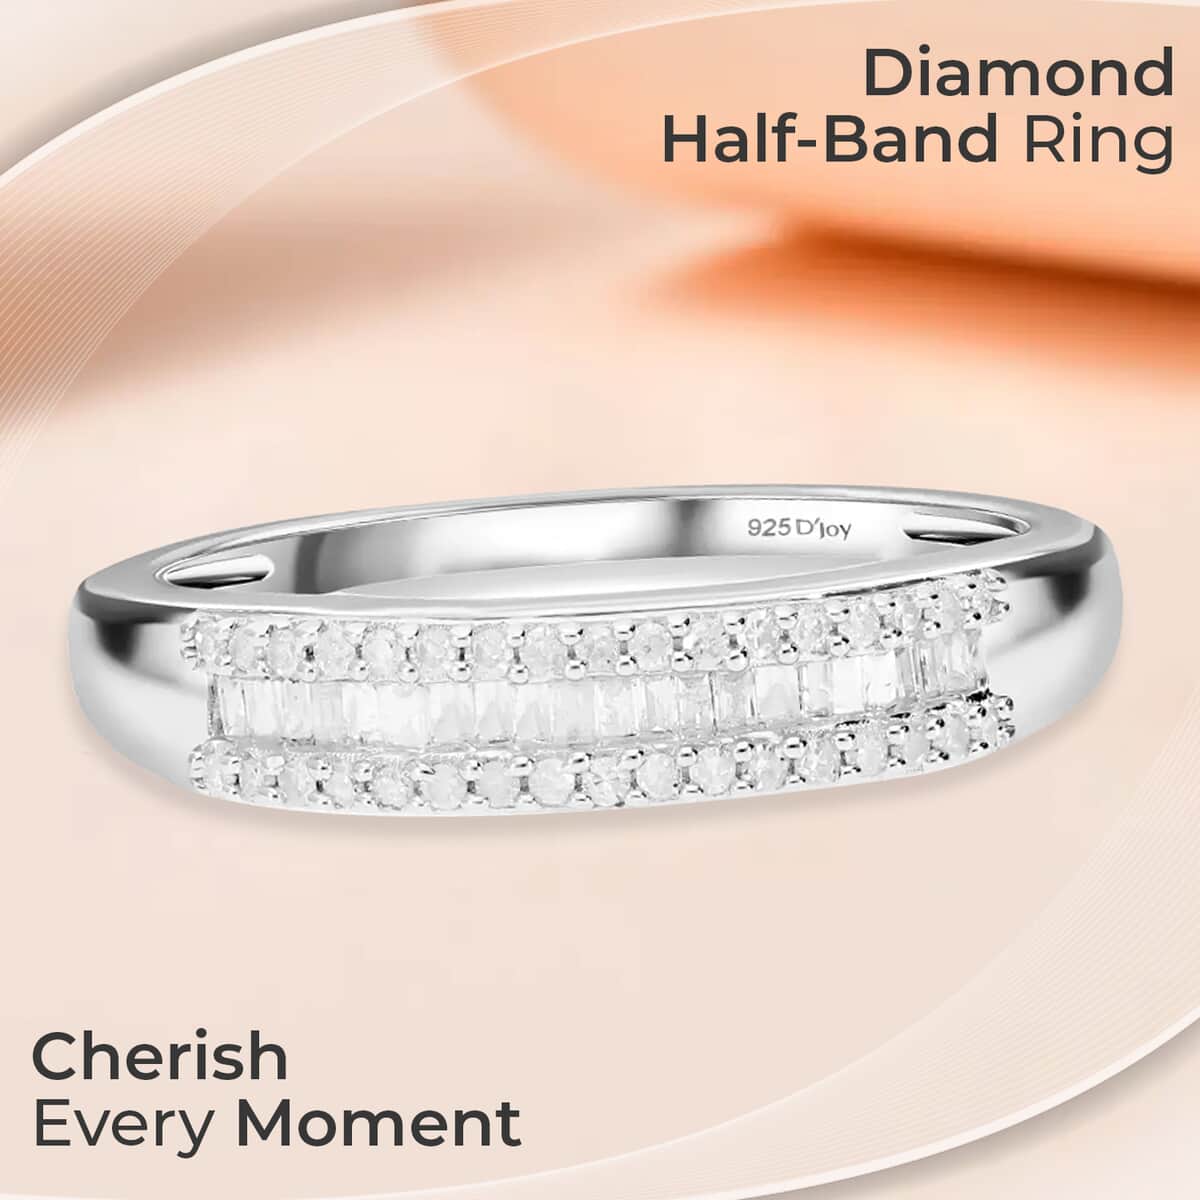 Buy Diamond Band Ring in Platinum Over Sterling Silver,Wedding Rings,Eternity  Band,Promise Rings For Women 0.25 ctw (Size 10) at ShopLC.